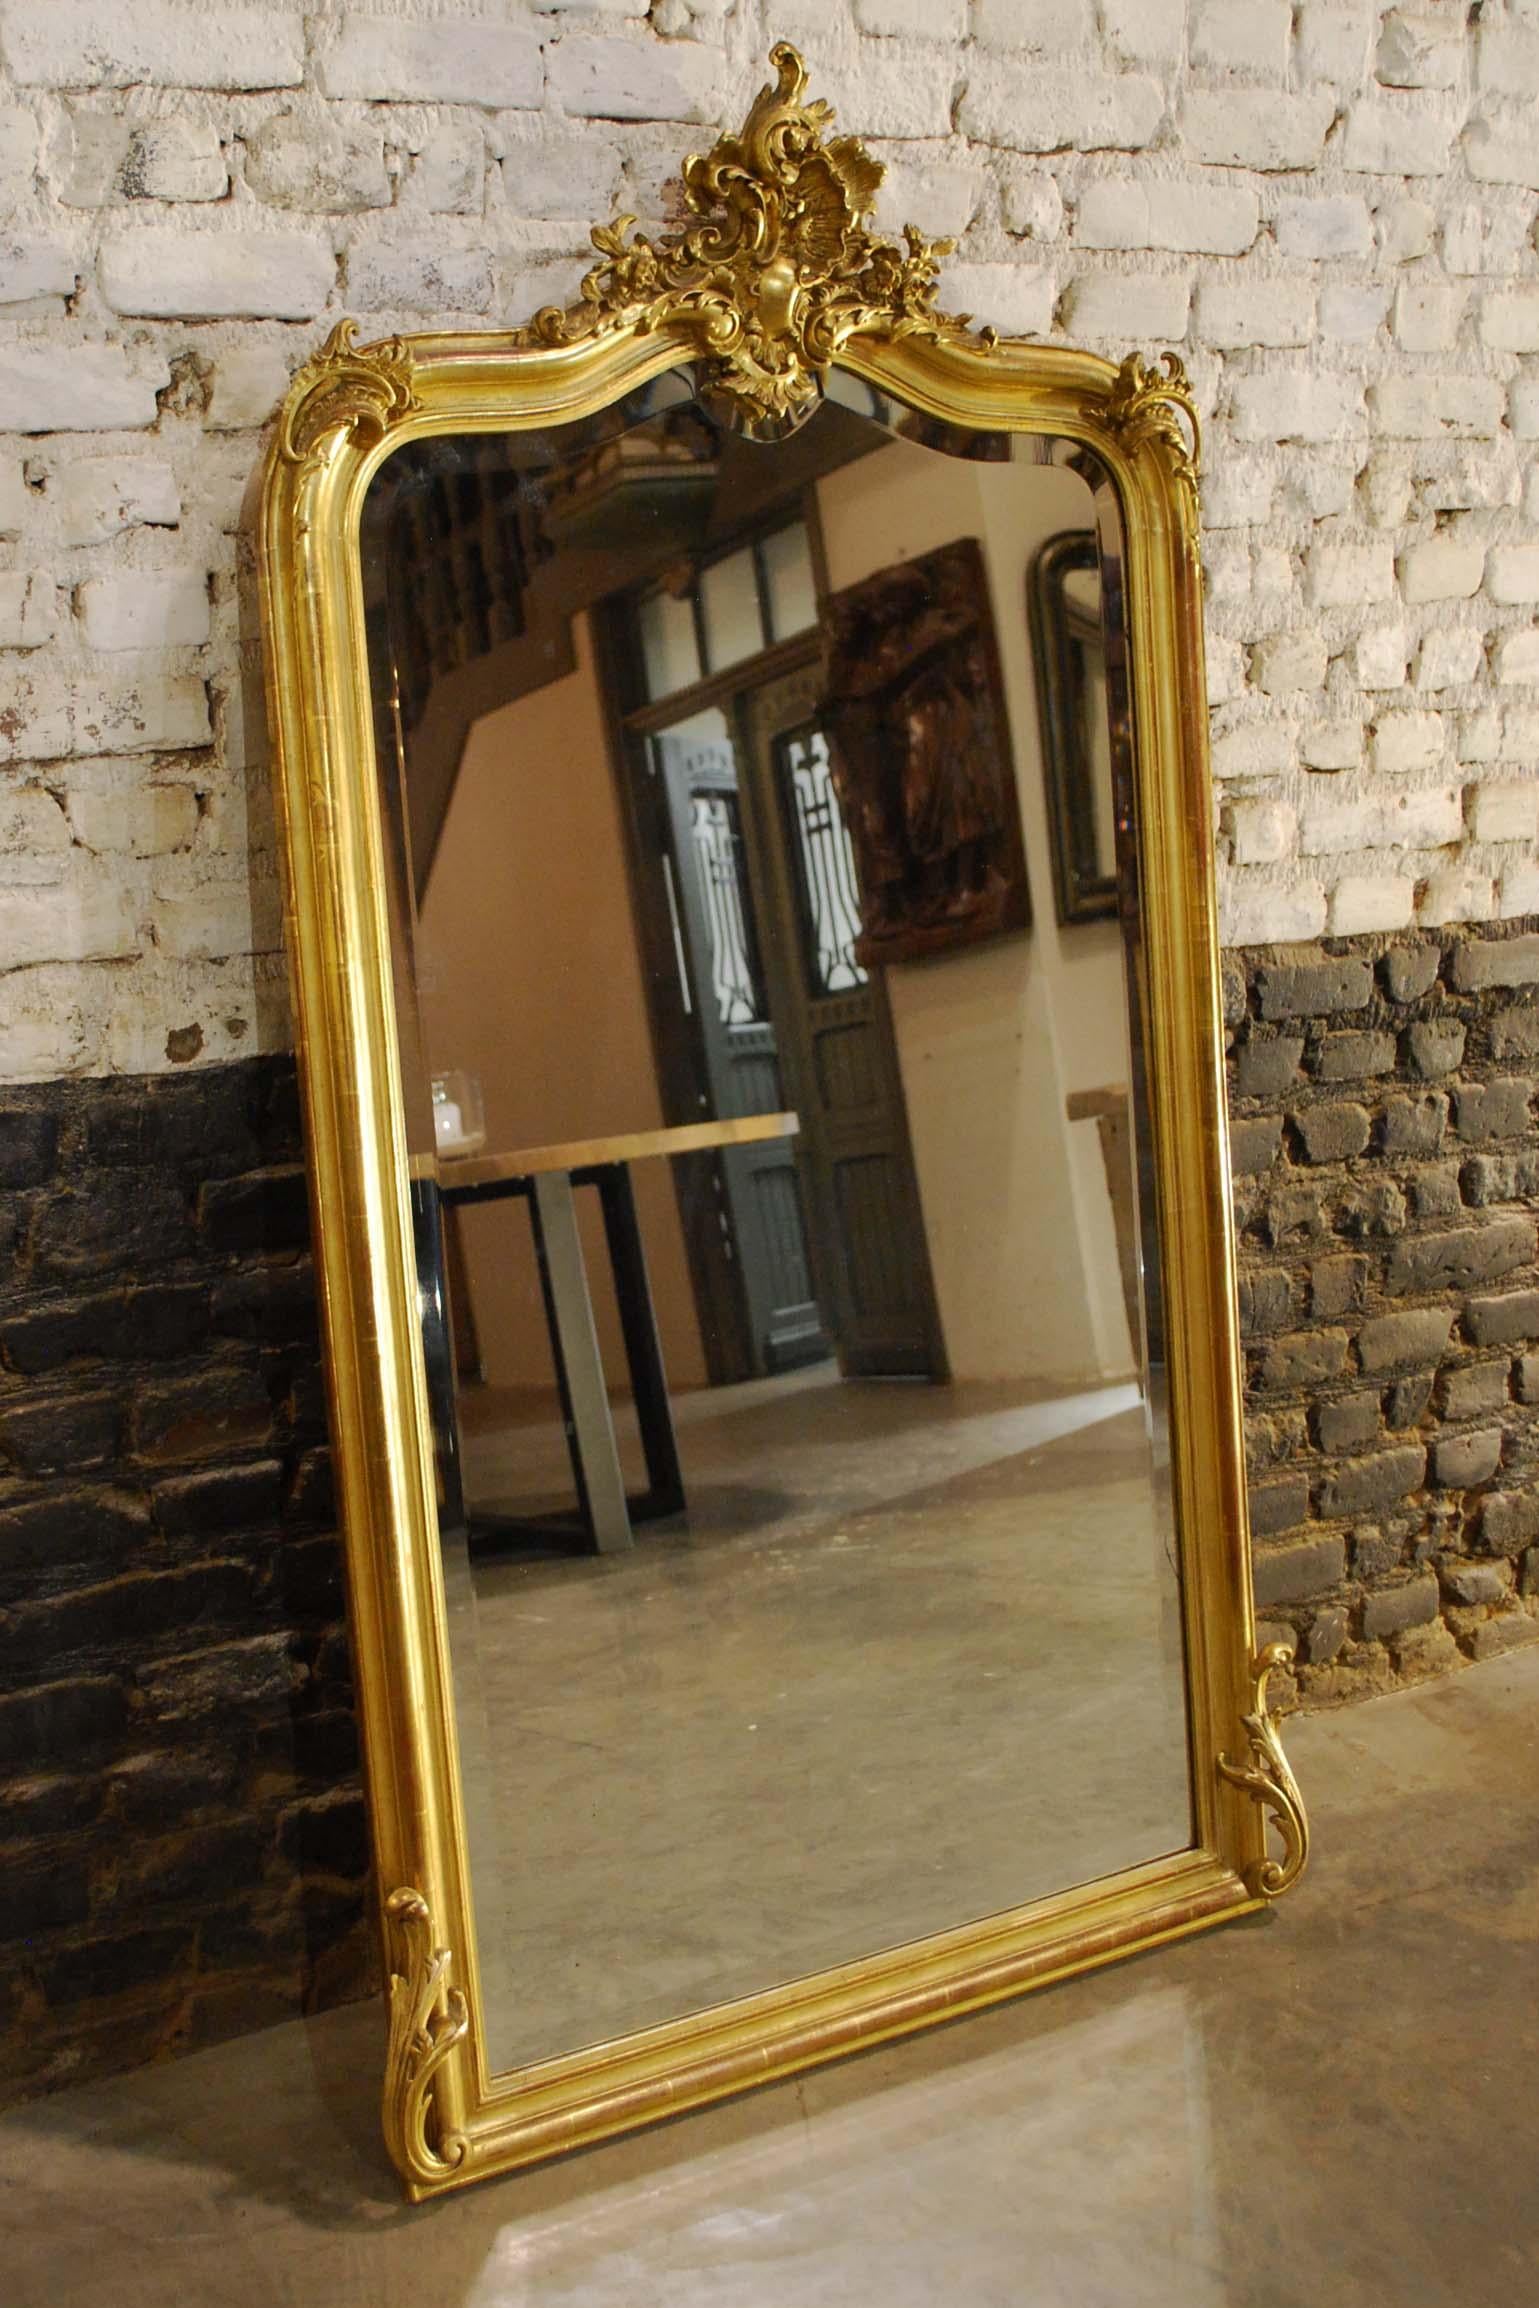 This beautiful antique French gold gilt mirror is a typical Louis Quinze or rococo mirror. 
It has the typical asymmetrical ornamentation and facetted mirror glass. The serpentine shaped top has rich ornamentation, depicting c-scrolls, accanthus,